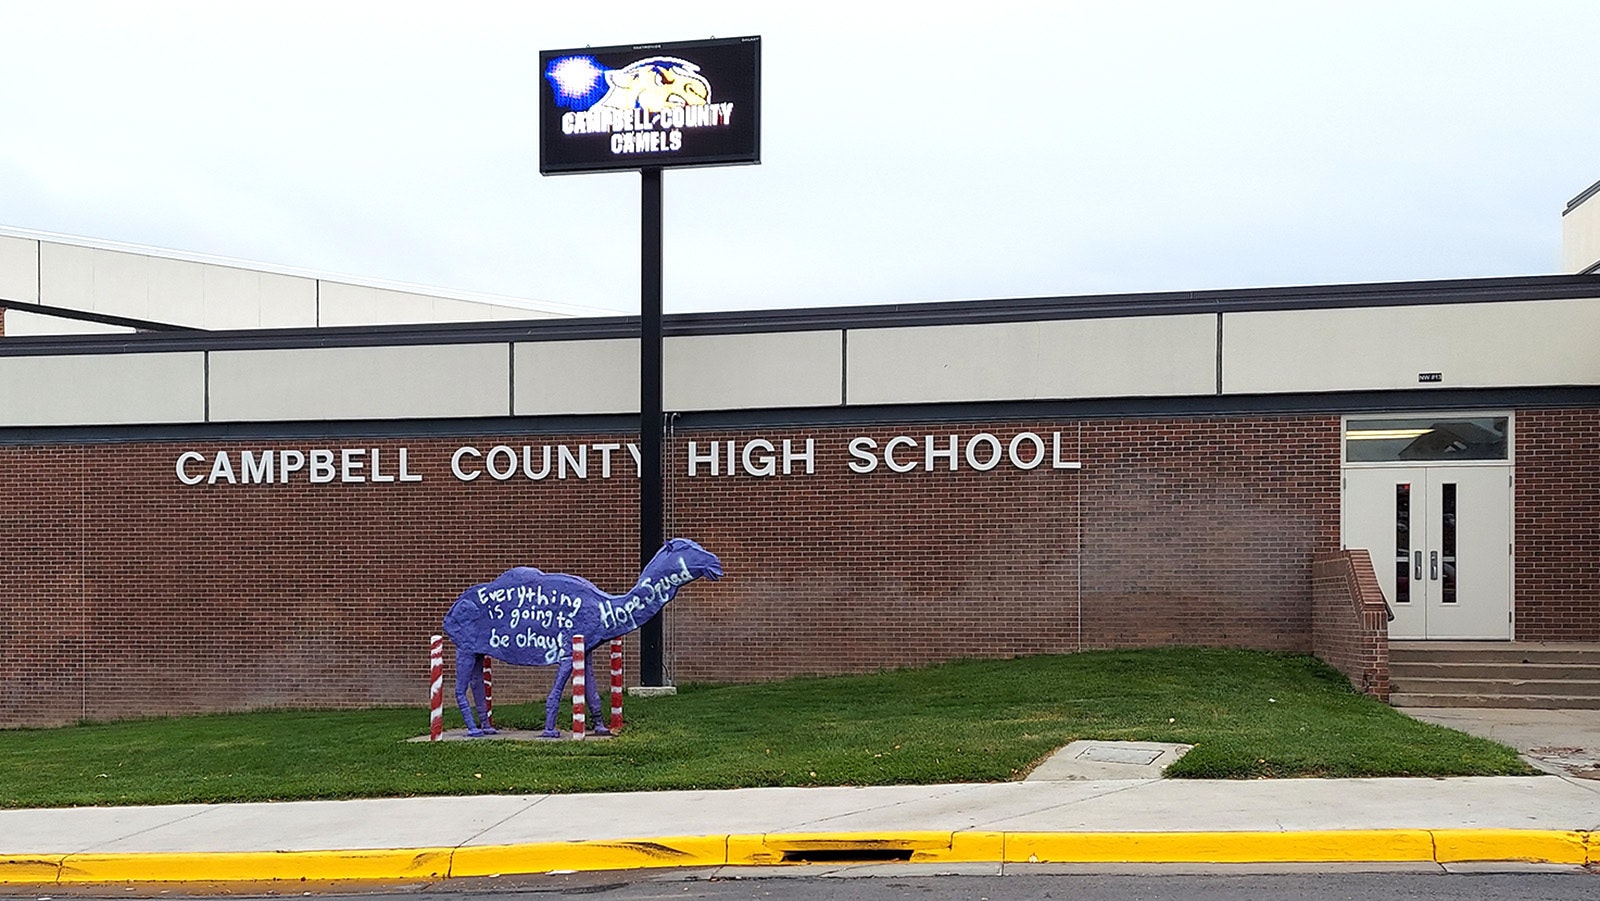 The camel is the mascot for Campbell County High School in Gillette, and the school's "Camel pride" is emphasized with the large camel sculpture in front of the school. Called Humphrey, the sculpture is painted by student classes and clubs multiple times a year, including the Hope Squad.